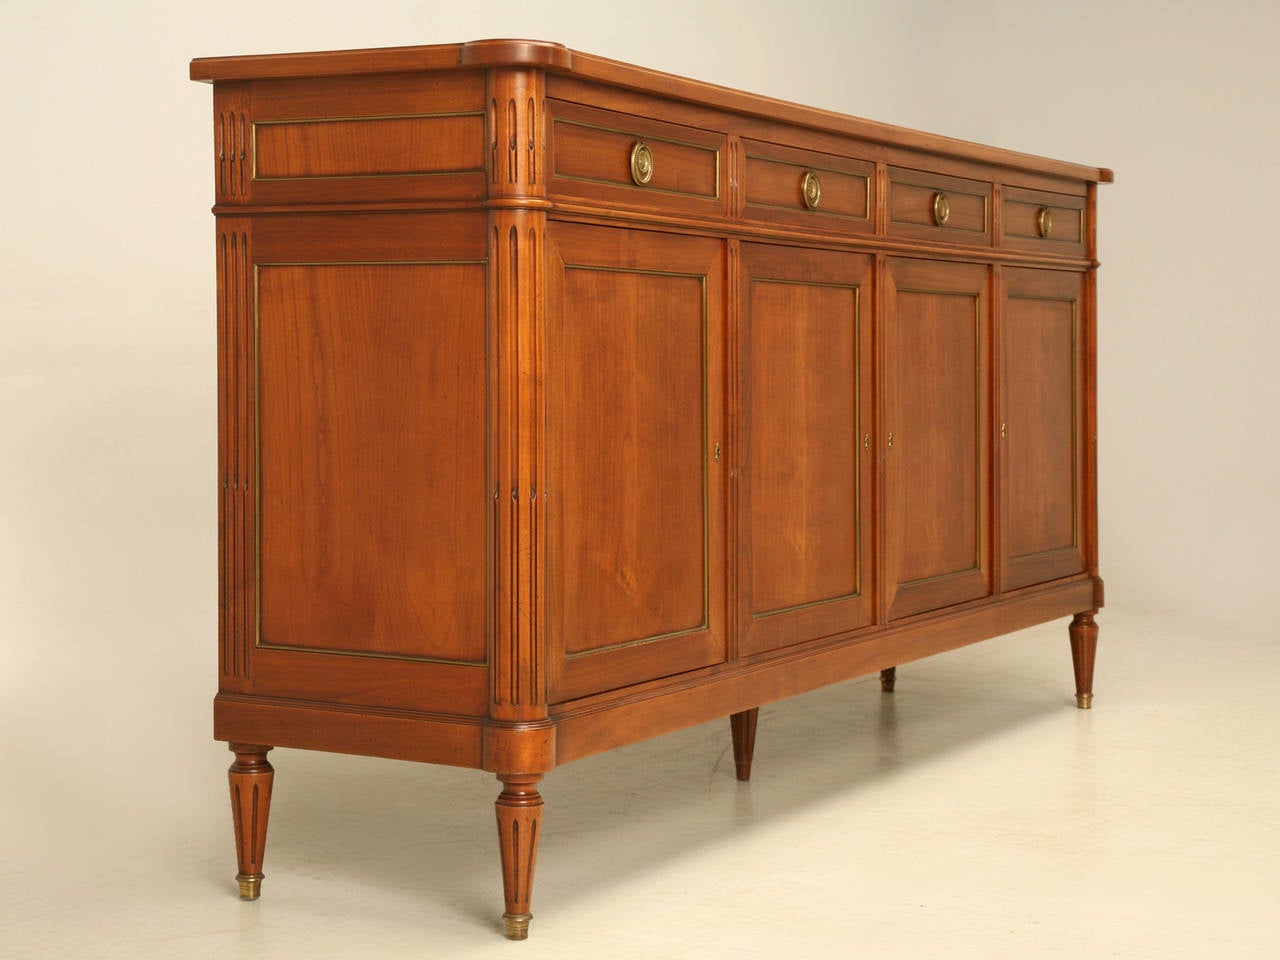 Vintage French Louis XVI style buffet with beautiful brass trim. Classic lines of a four-drawer over four-door model. The sideboard is completely original, both inside and out, and if you look very hard you can see some light surface scratches that